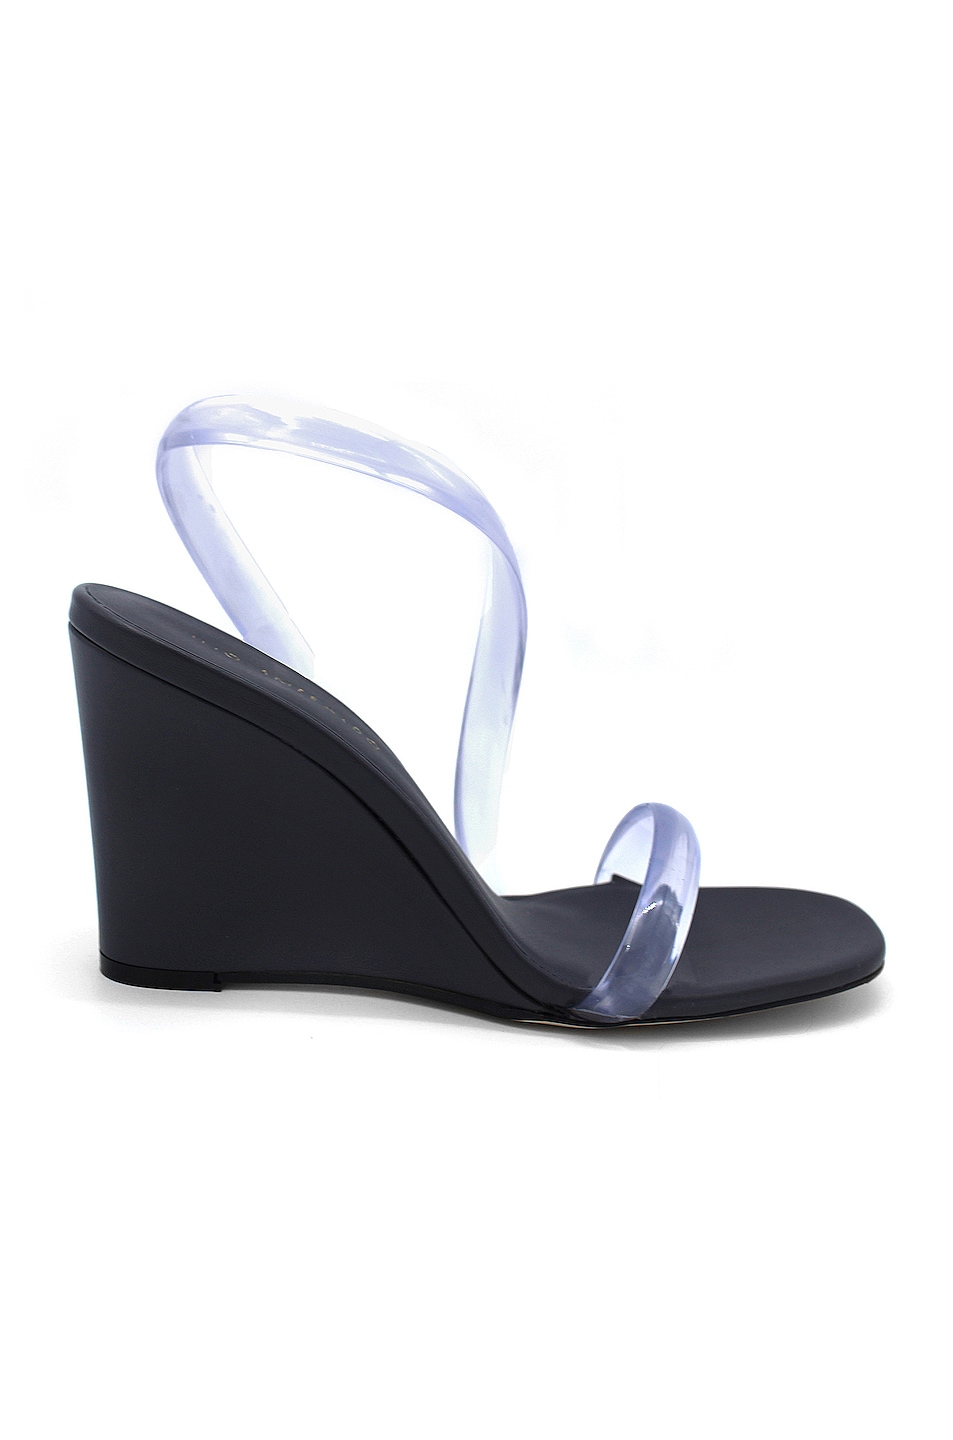 x Claire Rose Cliteur Wedge Sandal in Grey